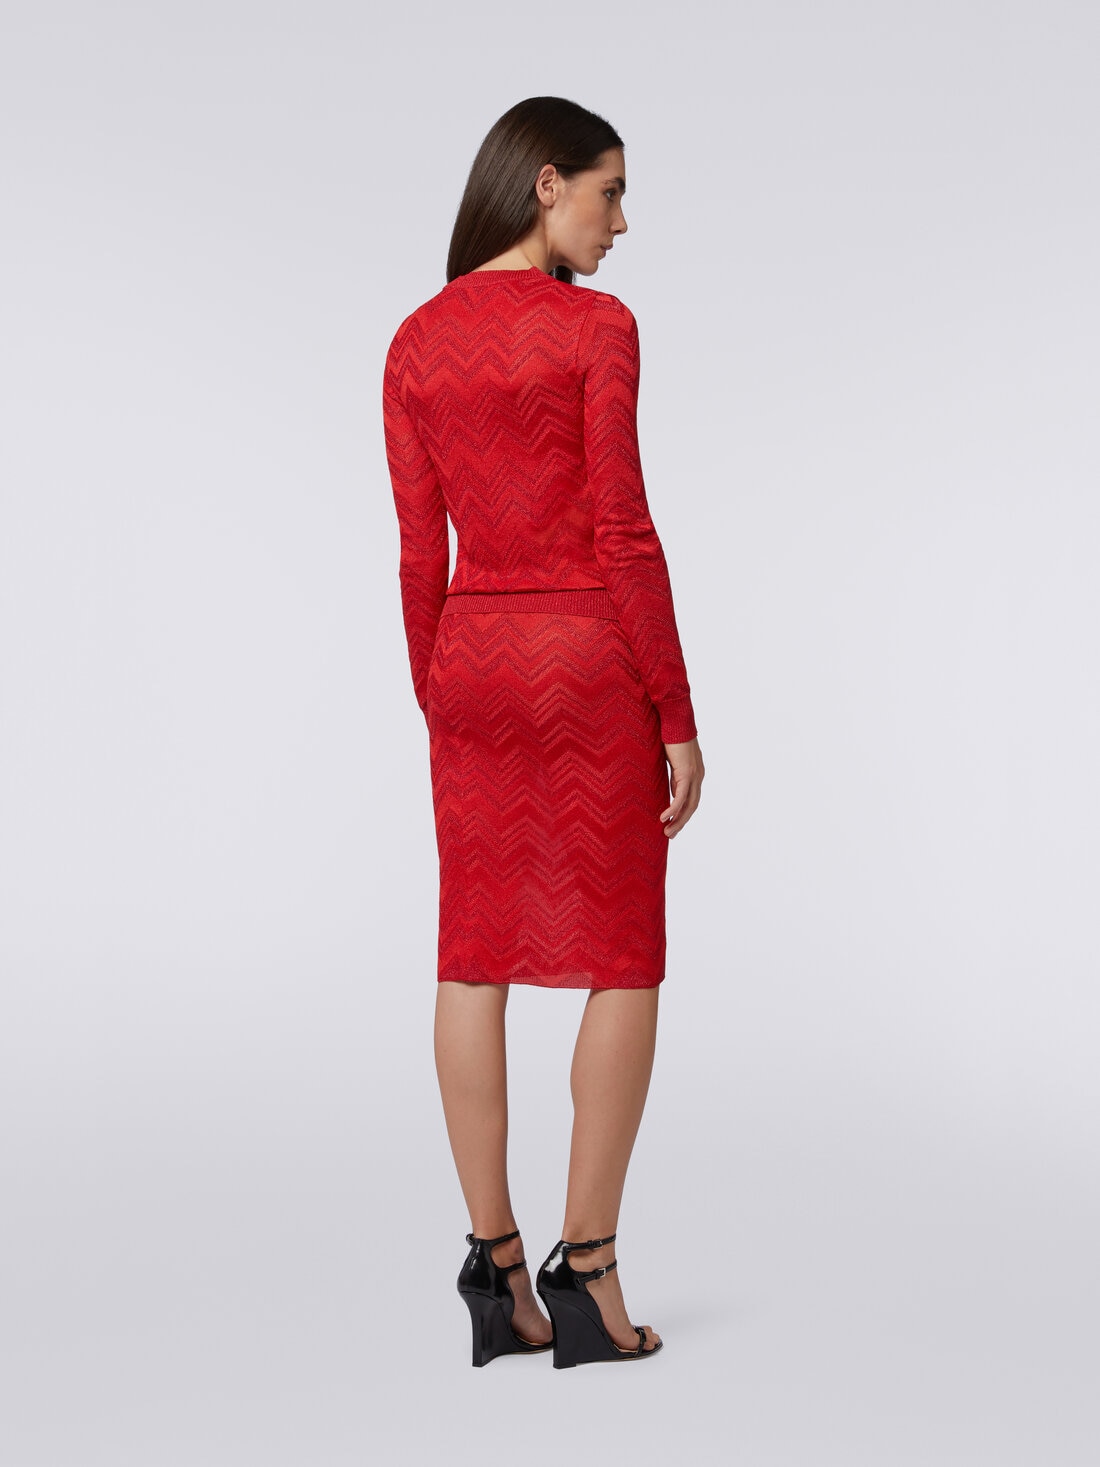 Longuette skirt in zigzag knit with lurex, Red  - DS24SH0TBK034J81756 - 3